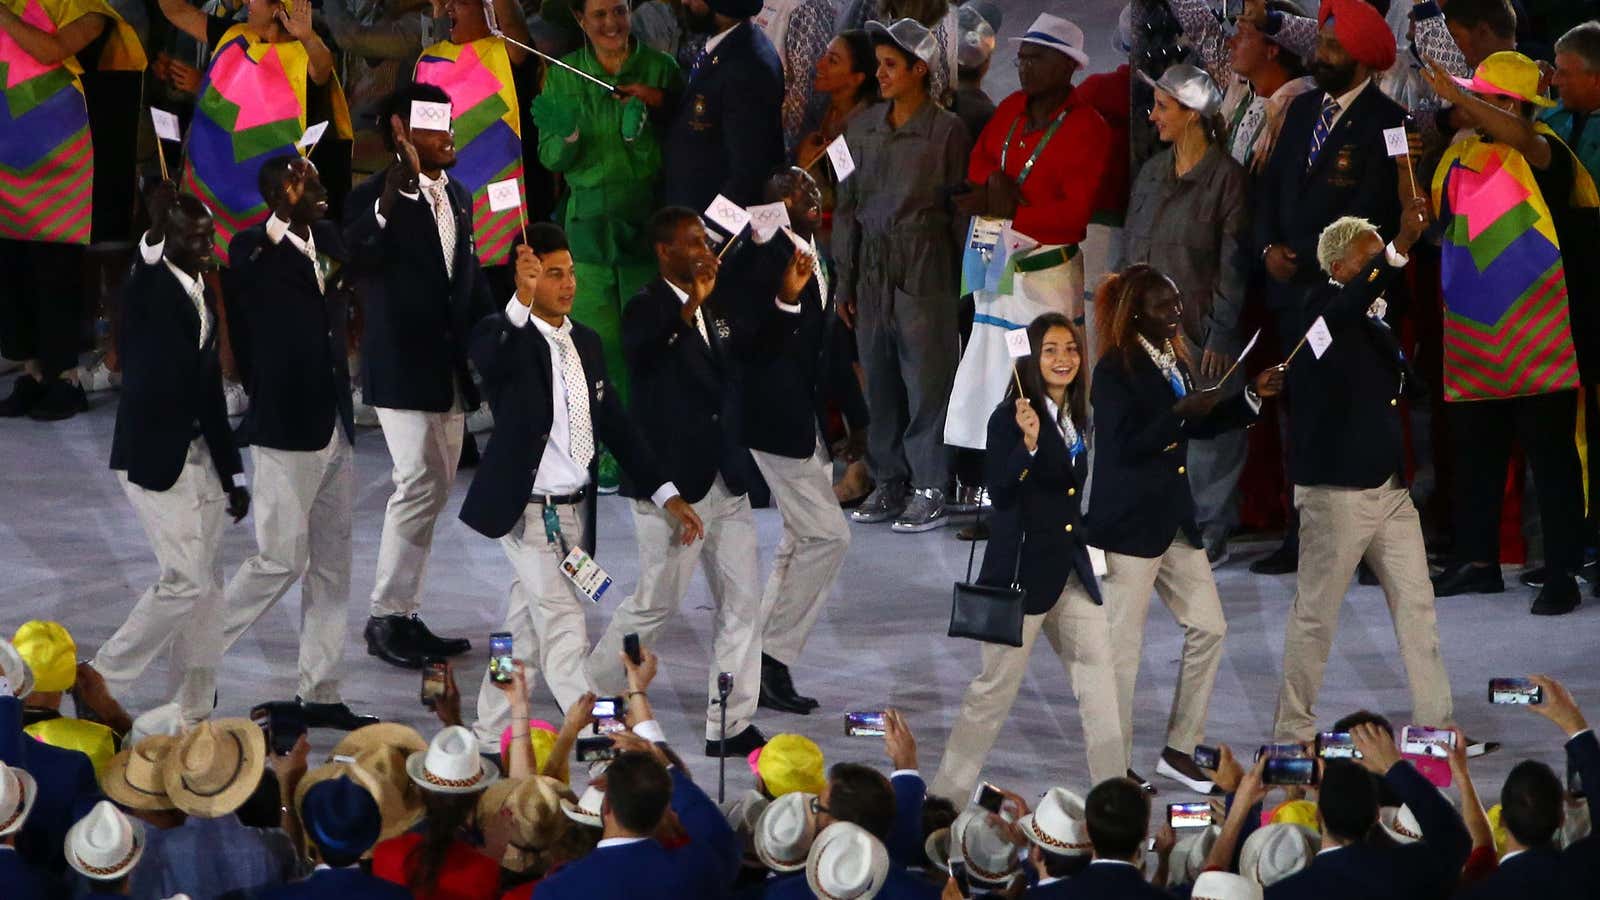 The Refugee Olympic Athletes’ team arrives for the opening ceremony.